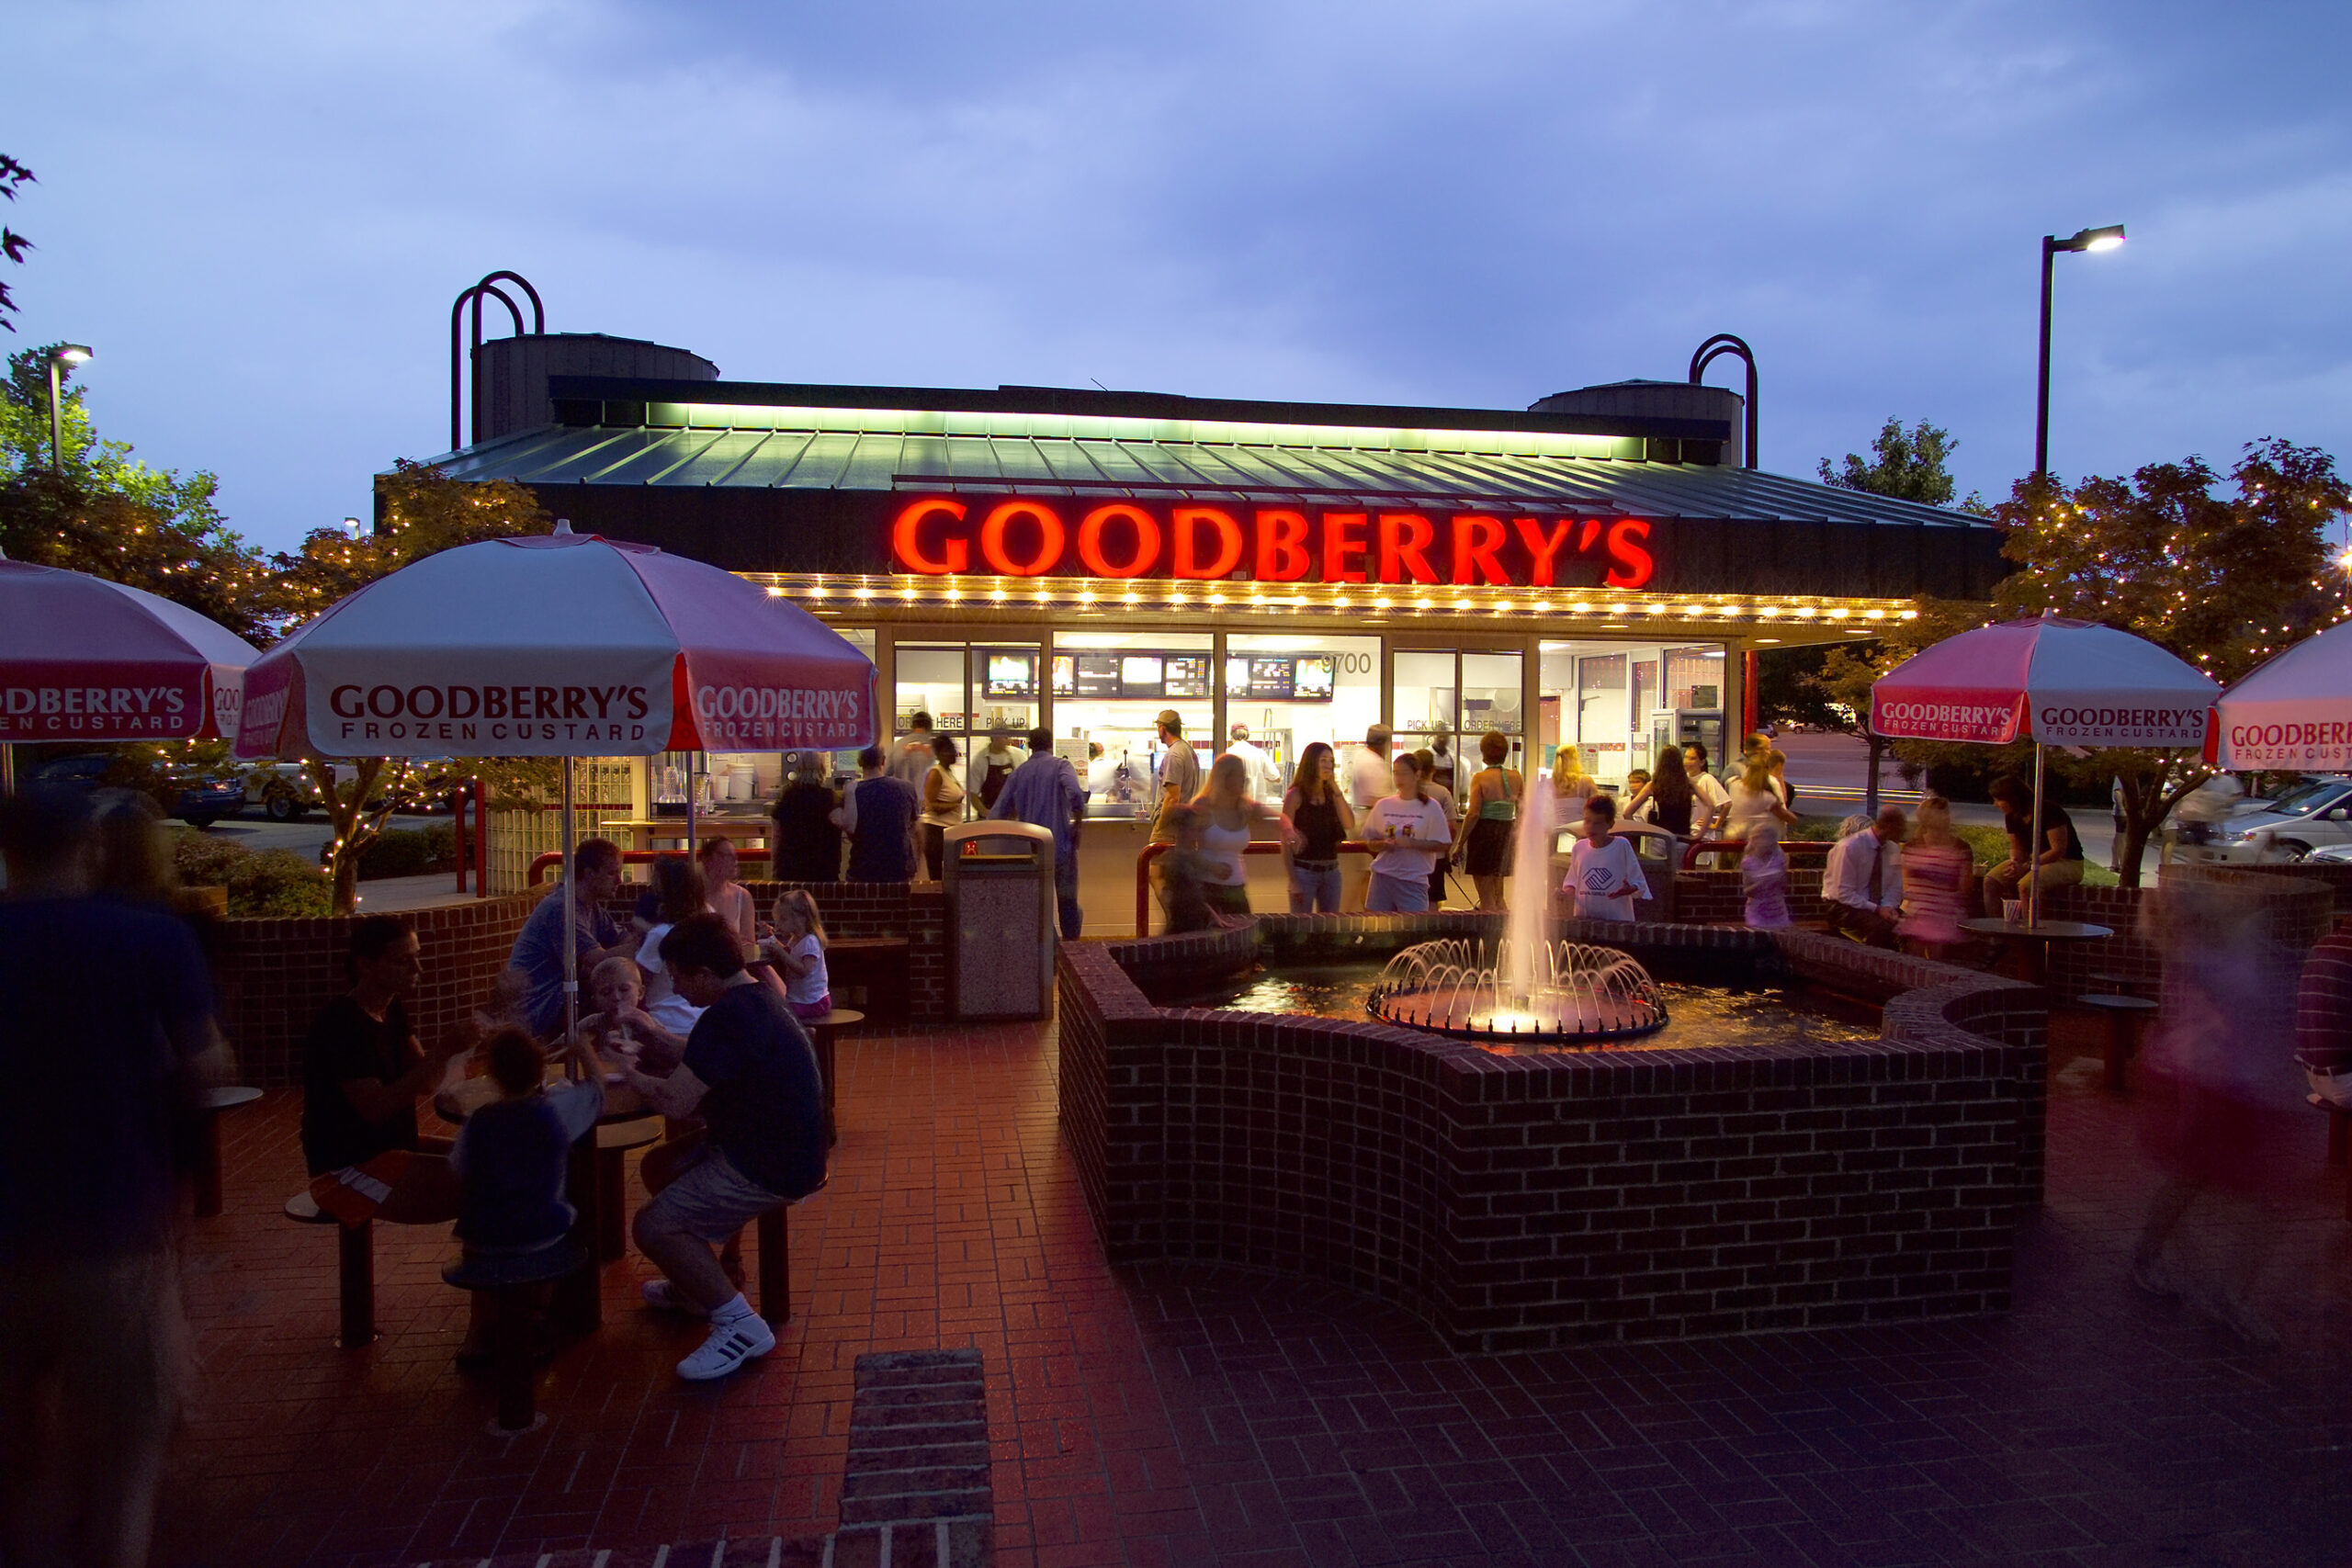 Guests gather at dusk in the courtyard of Goodberry's at Harvest Plaza on Strickland Road in Raleigh